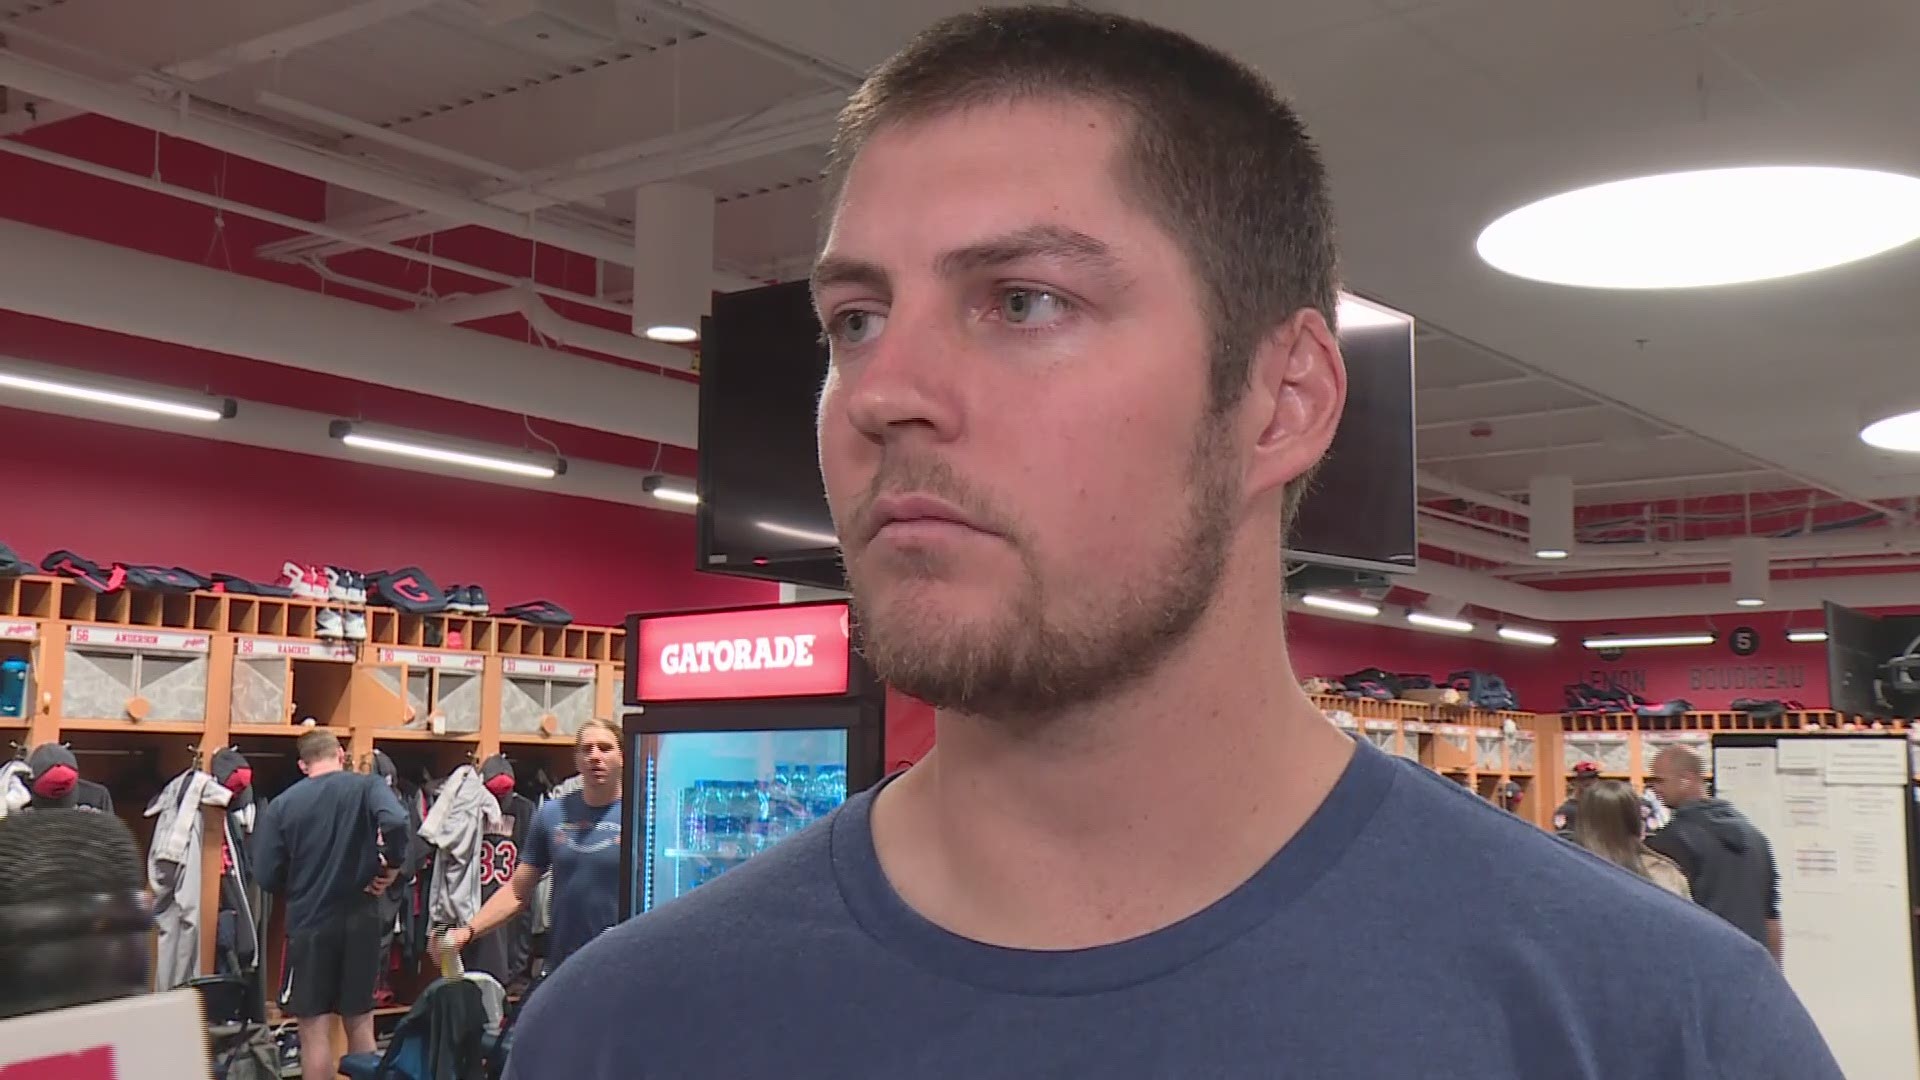 Speaking to WKYC's Dave Chudowsky at Spring Training, Cleveland Indians pitcher Trevor Bauer elaborated on comments he made to Sports Illustrated regarding relationships.